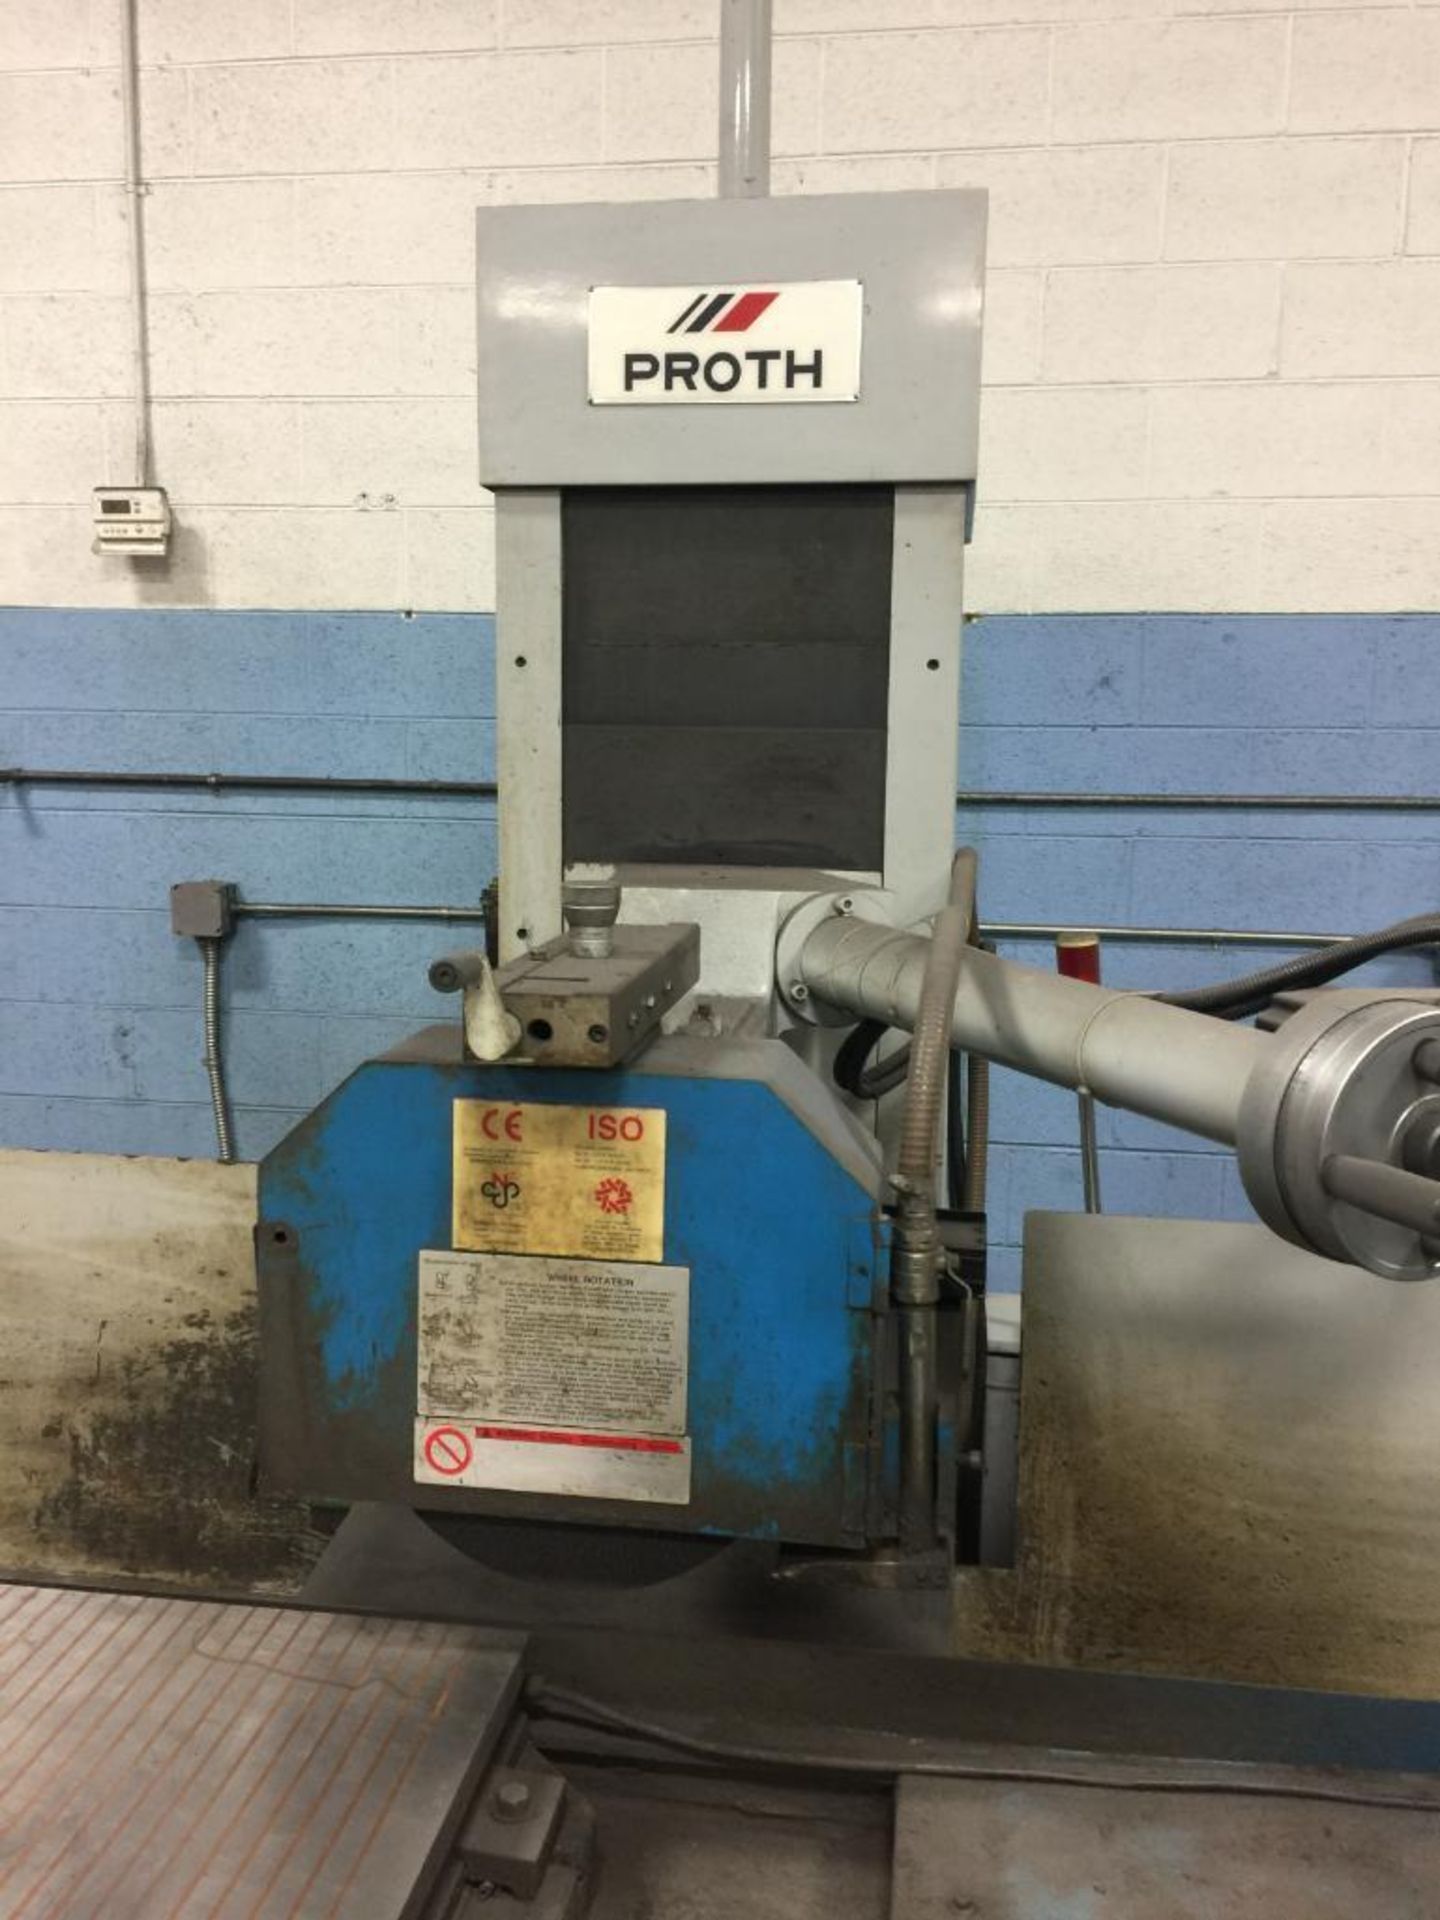 2002 Proth 48" X 24" Surface Grinder - Image 2 of 7